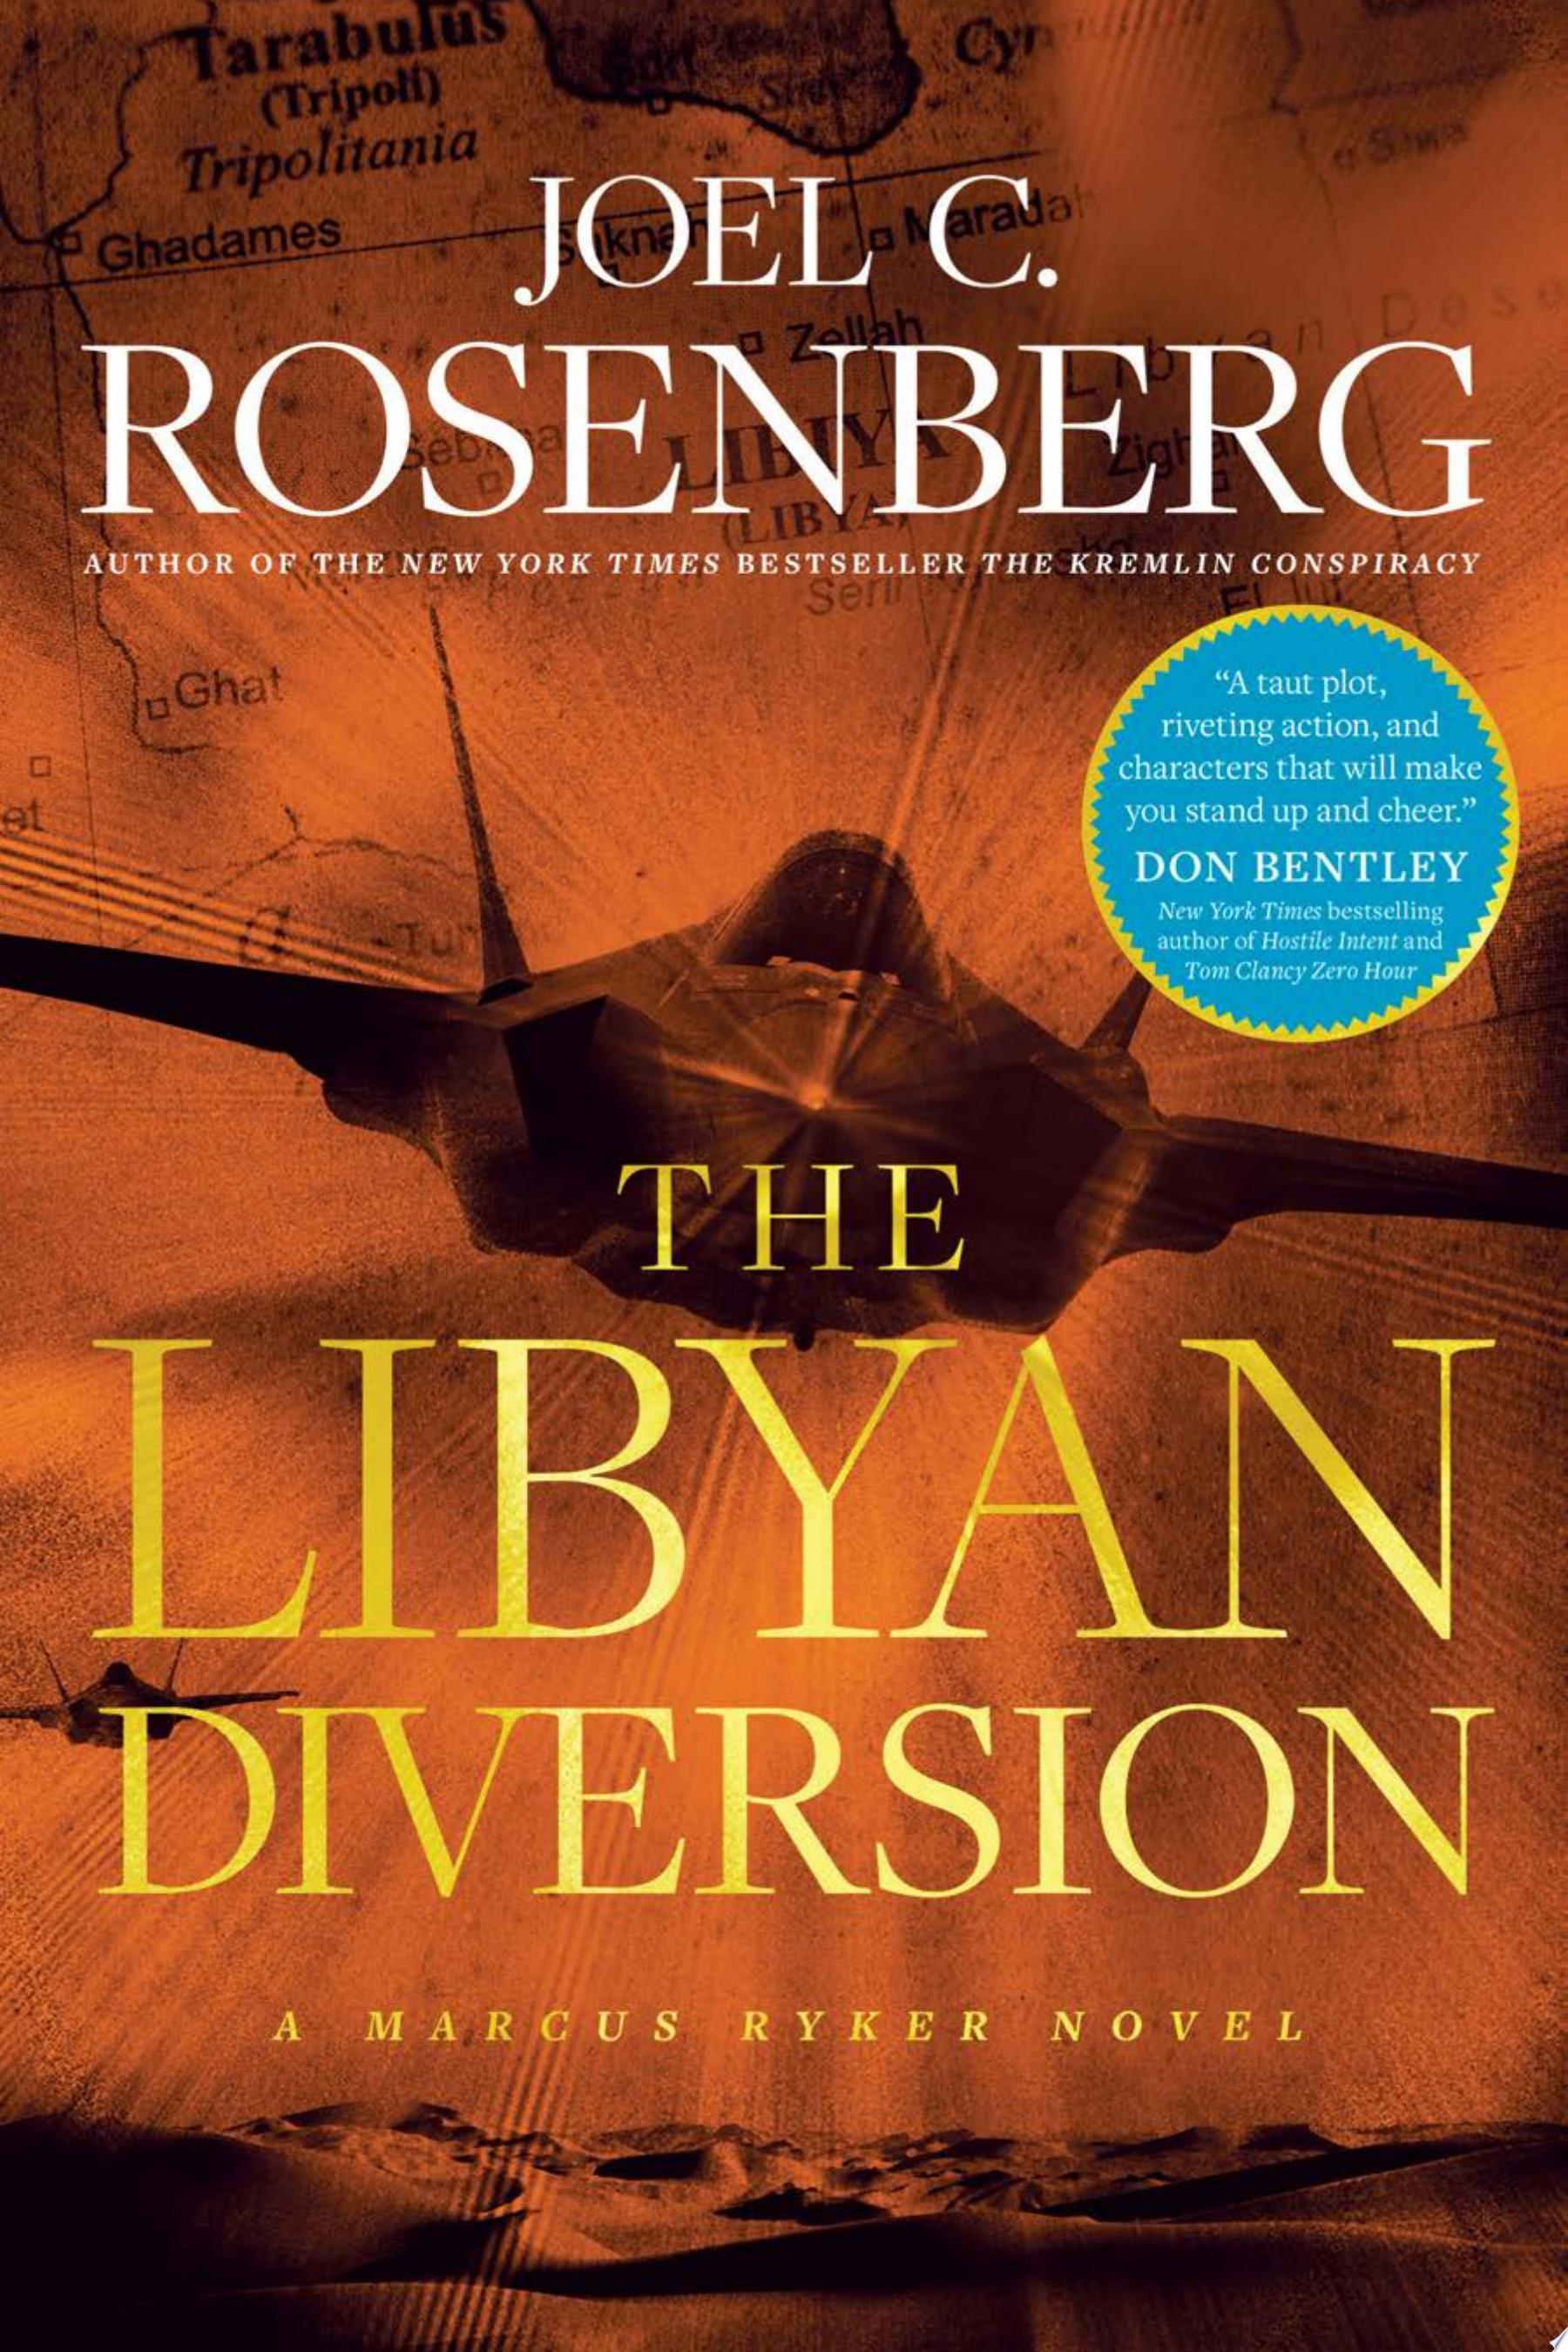 Image for "The Libyan Diversion"